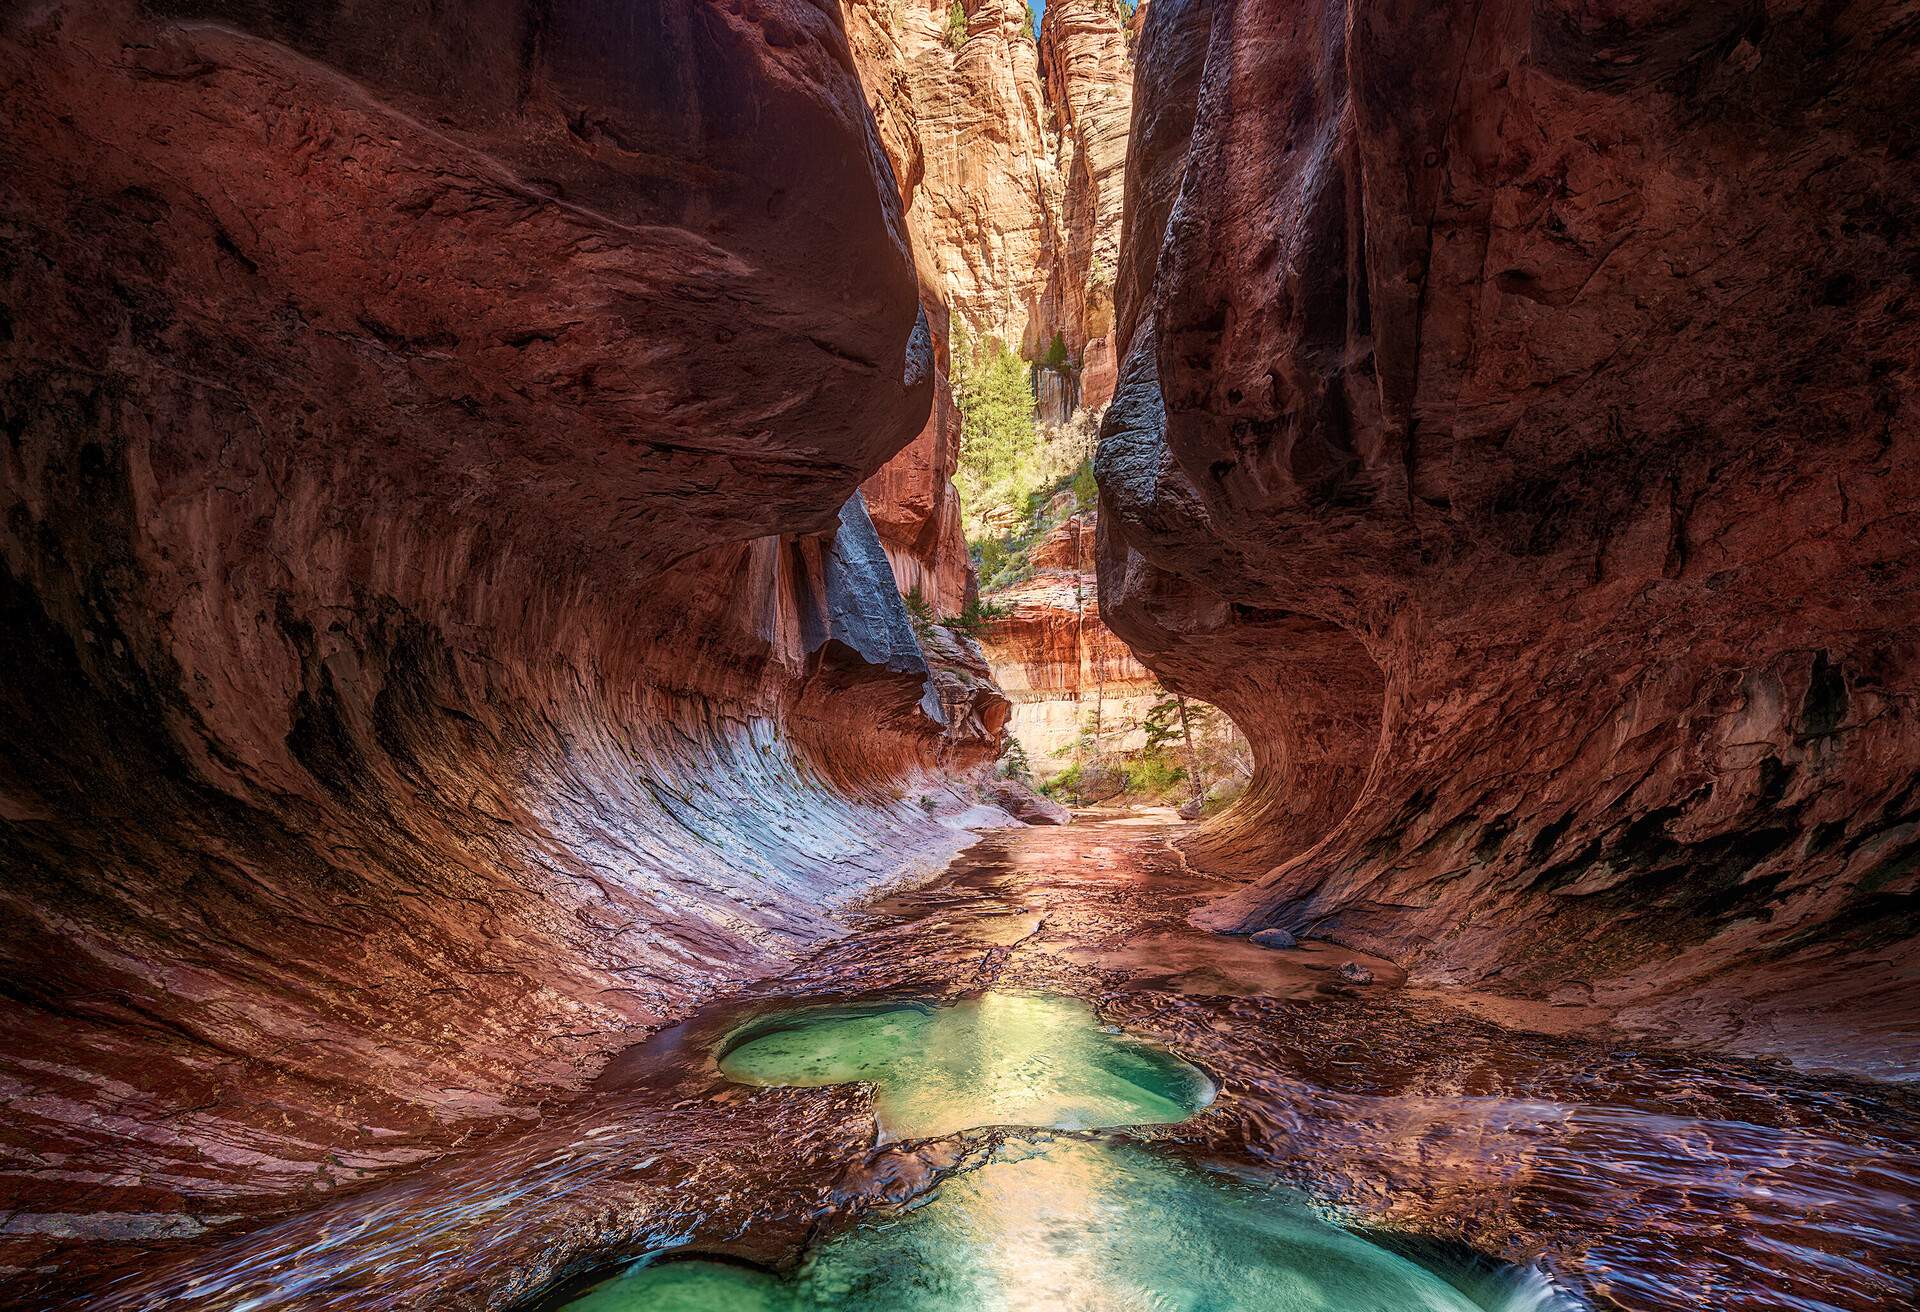 Vivid color in a tight canyon with stream running through. The Subway, Left fork of North Creek , Zion Natioanl Park, Utah. The Subway is a colloquial name for a uniquely shaped slot canyon in Zion National Park. It is located between two peaks called the North and South Guardian Angels, deep within the Left Fork of North Creek. It is part of the larger Great West Canyon system, which includes both the Left and Right Forks of North Creek. The Subway is so named for its tube-like, undercut slot canyons. This segment of canyon is less than 0.25 miles (0.40 km) in length, but long approach and exit hikes are necessary for access.